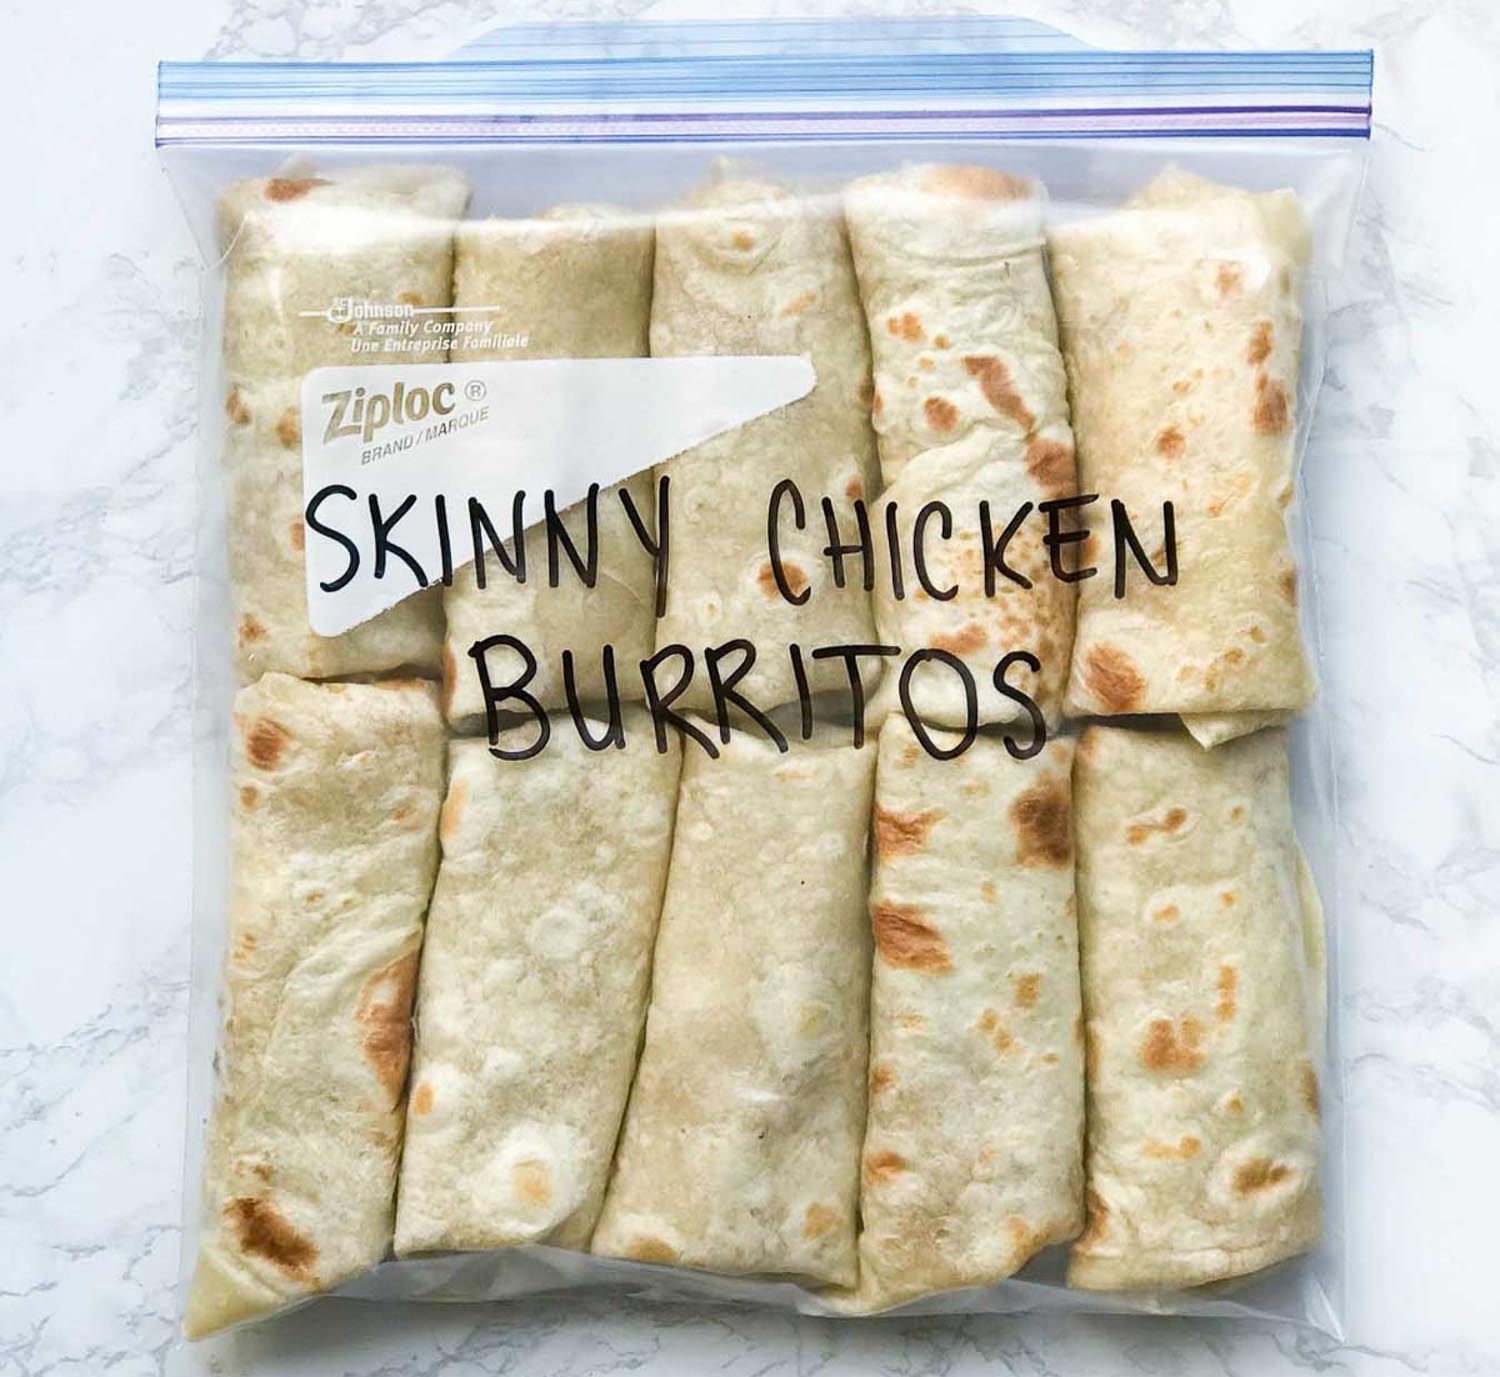 A gallon size ziploc bag filled with 5 burritos and the words "Skinny Chicken Burritos" on it.